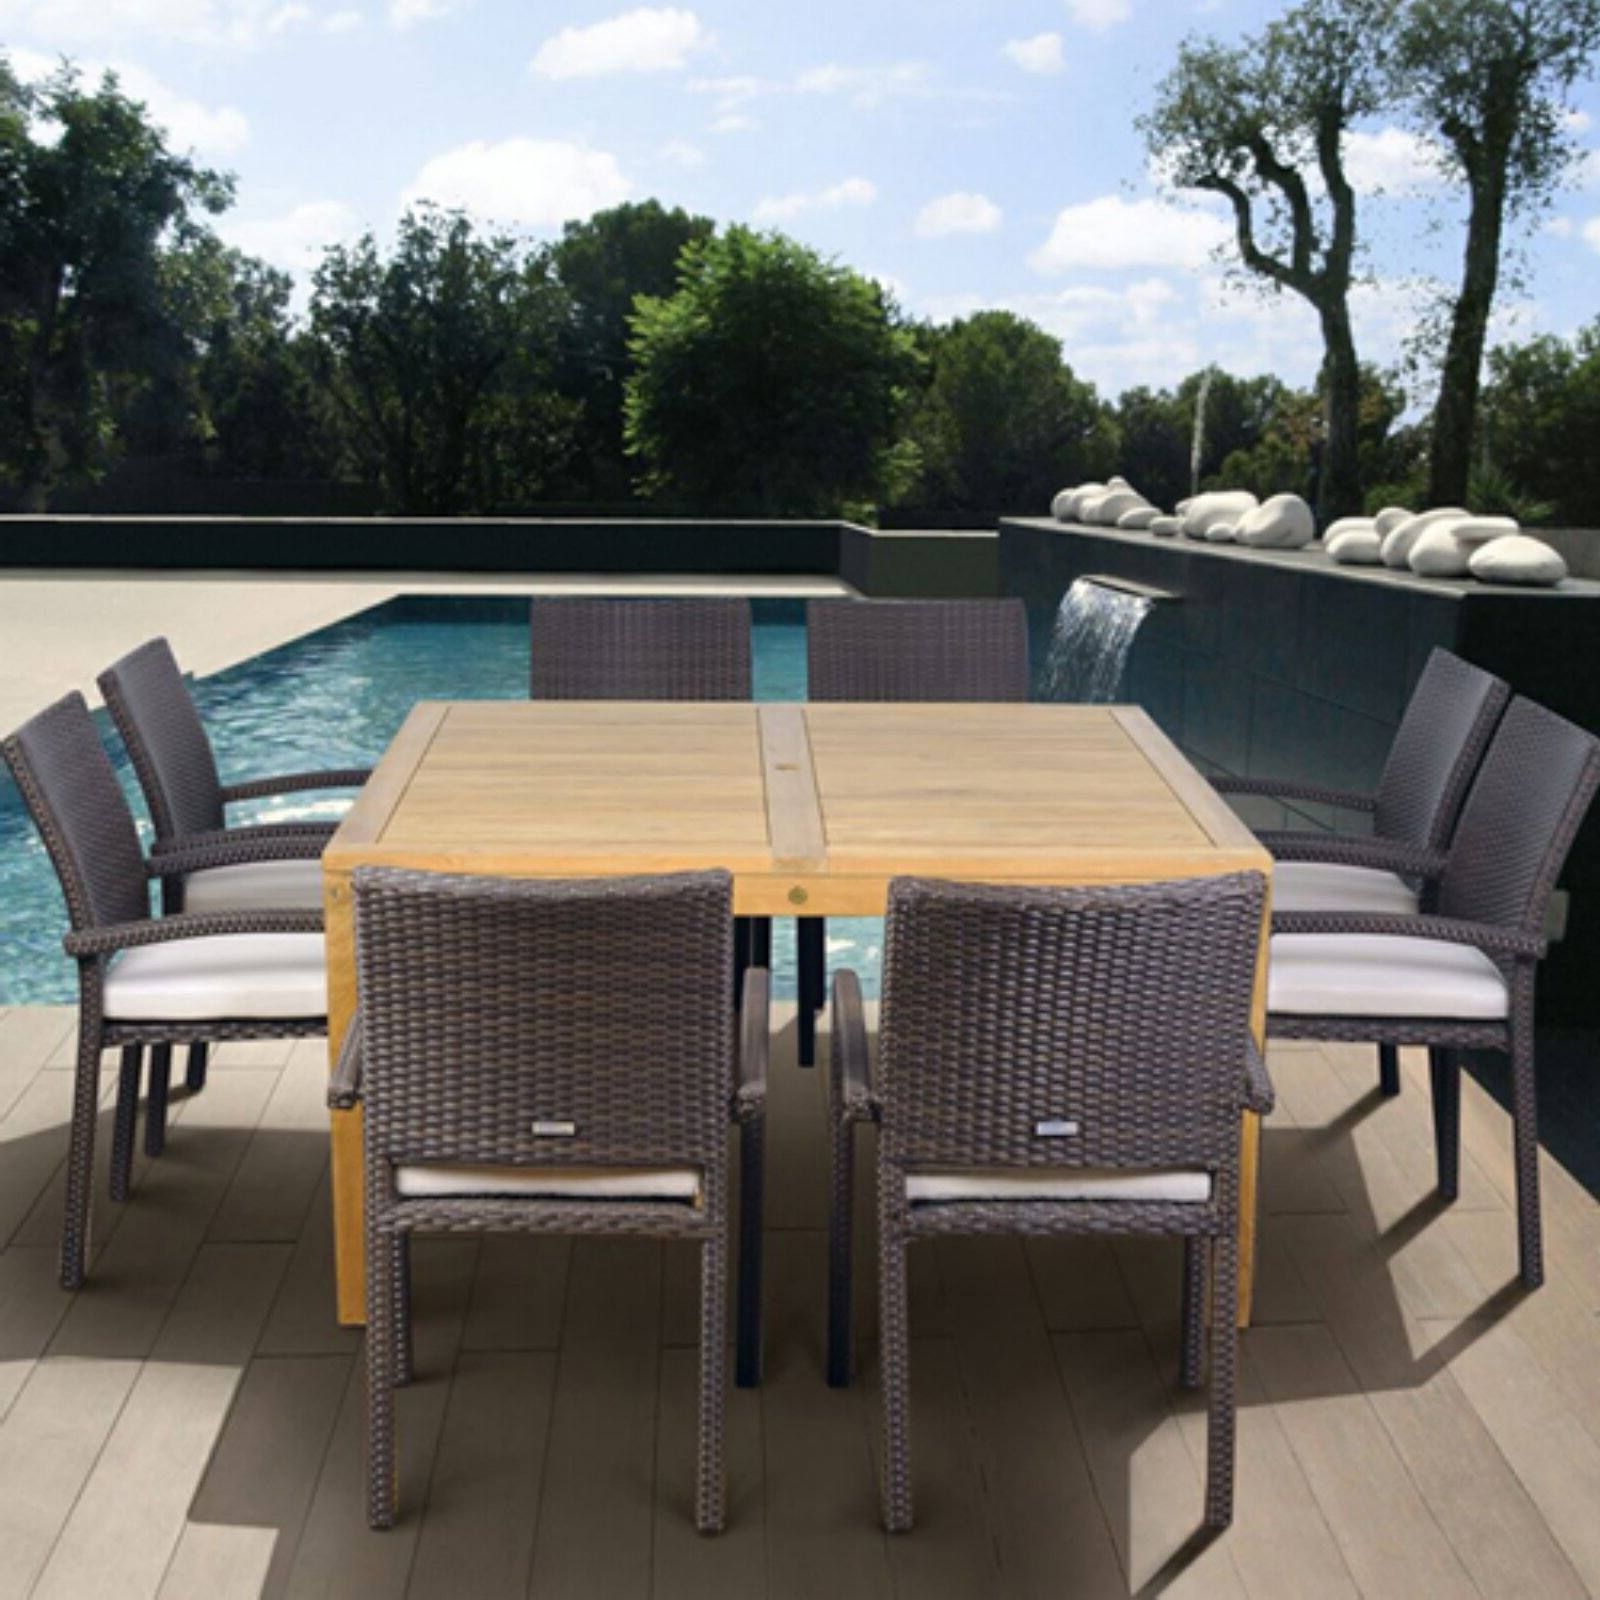 Amazonia Davenport 9 Piece Teak/wicker Square Patio Dining Set Intended For Widely Used Square 9 Piece Outdoor Dining Sets (View 14 of 15)